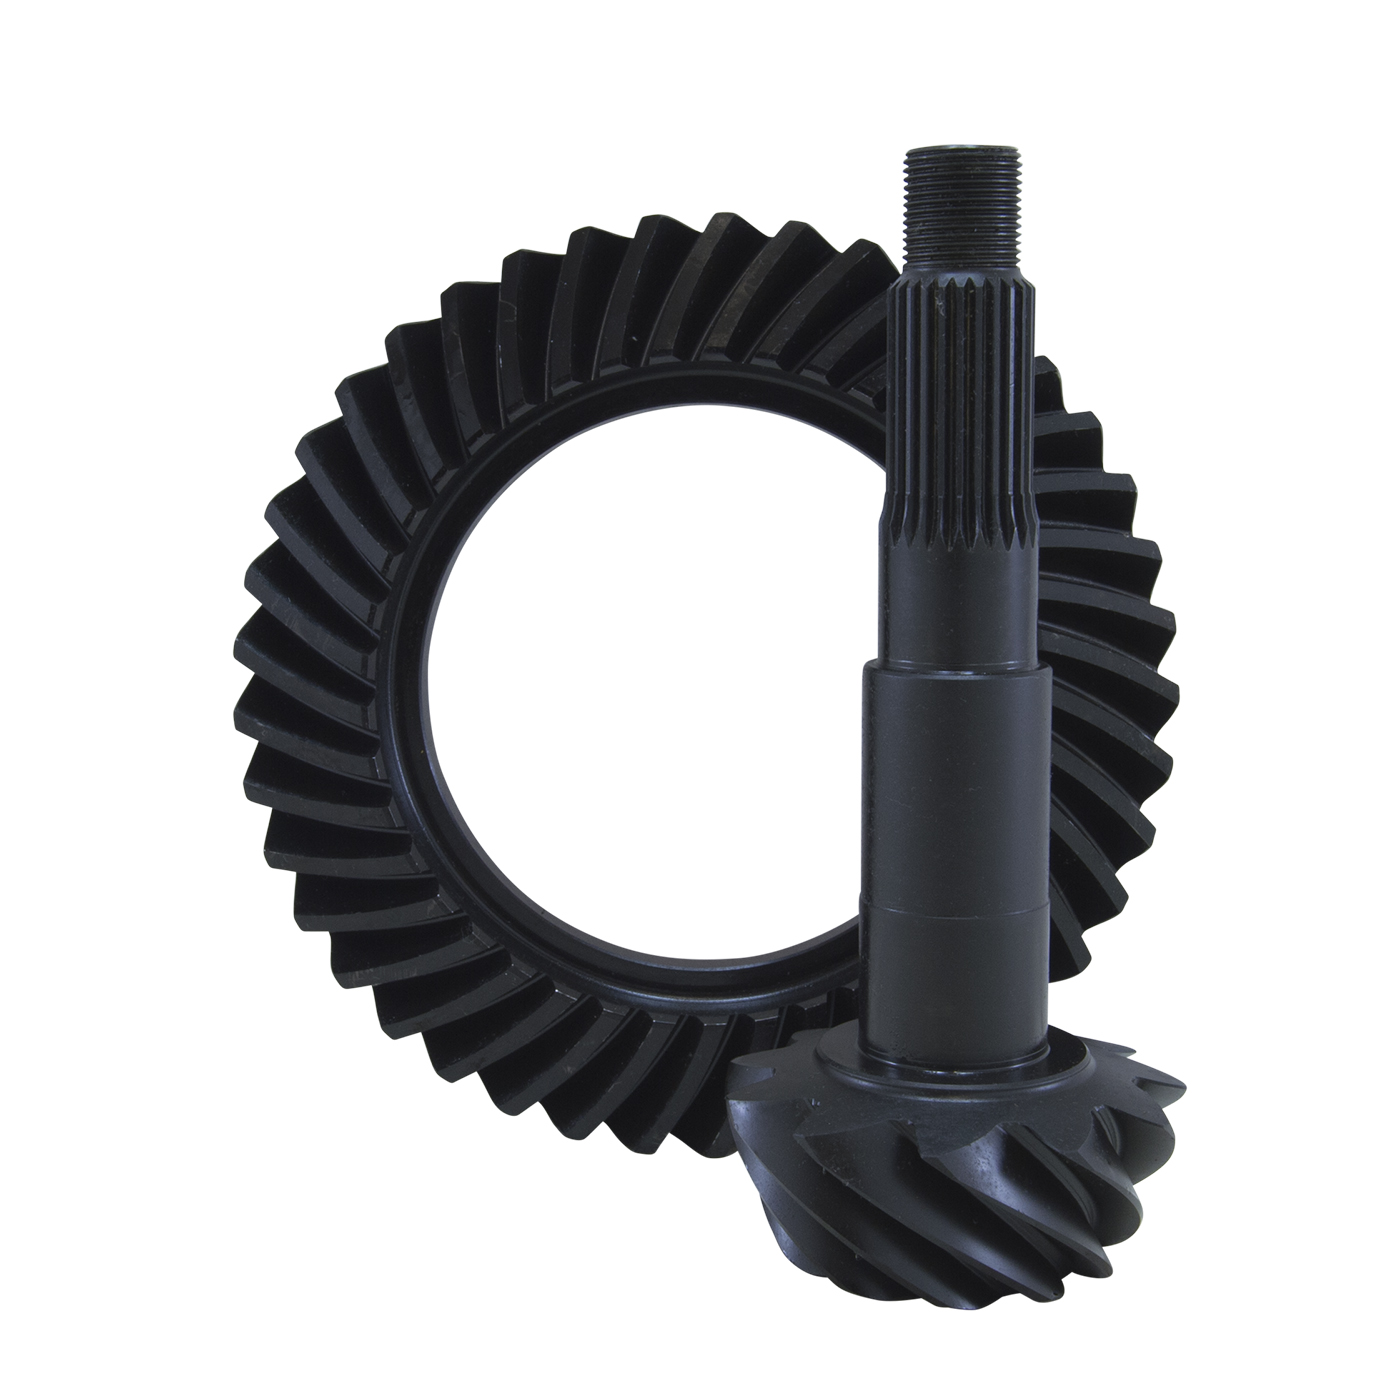 USA Standard Ring & Pinion gear set for GM 12 bolt car in a 3.42 ratio